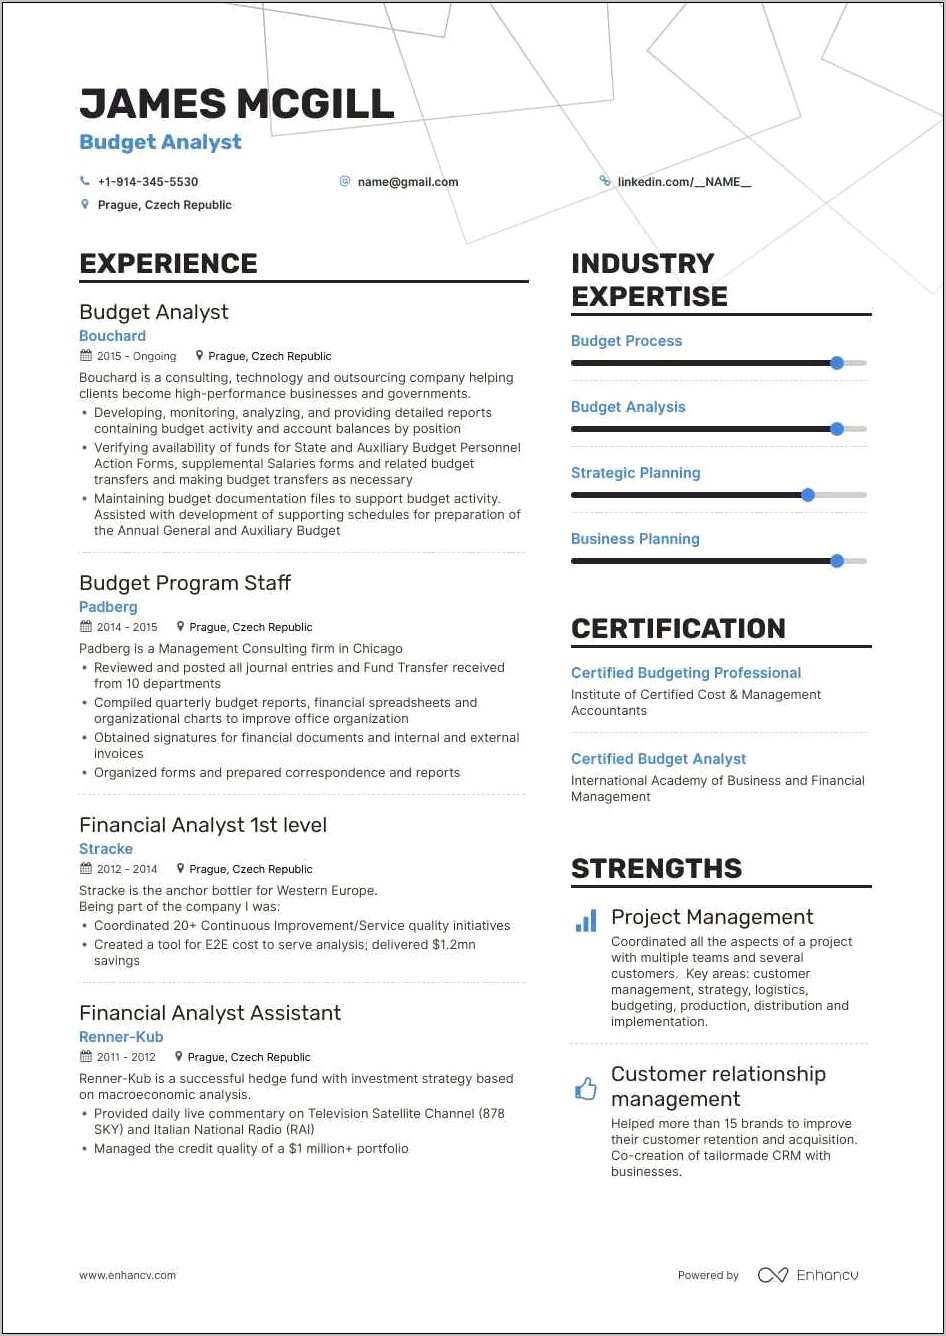 Examples Of Resumes For Budget Analyst